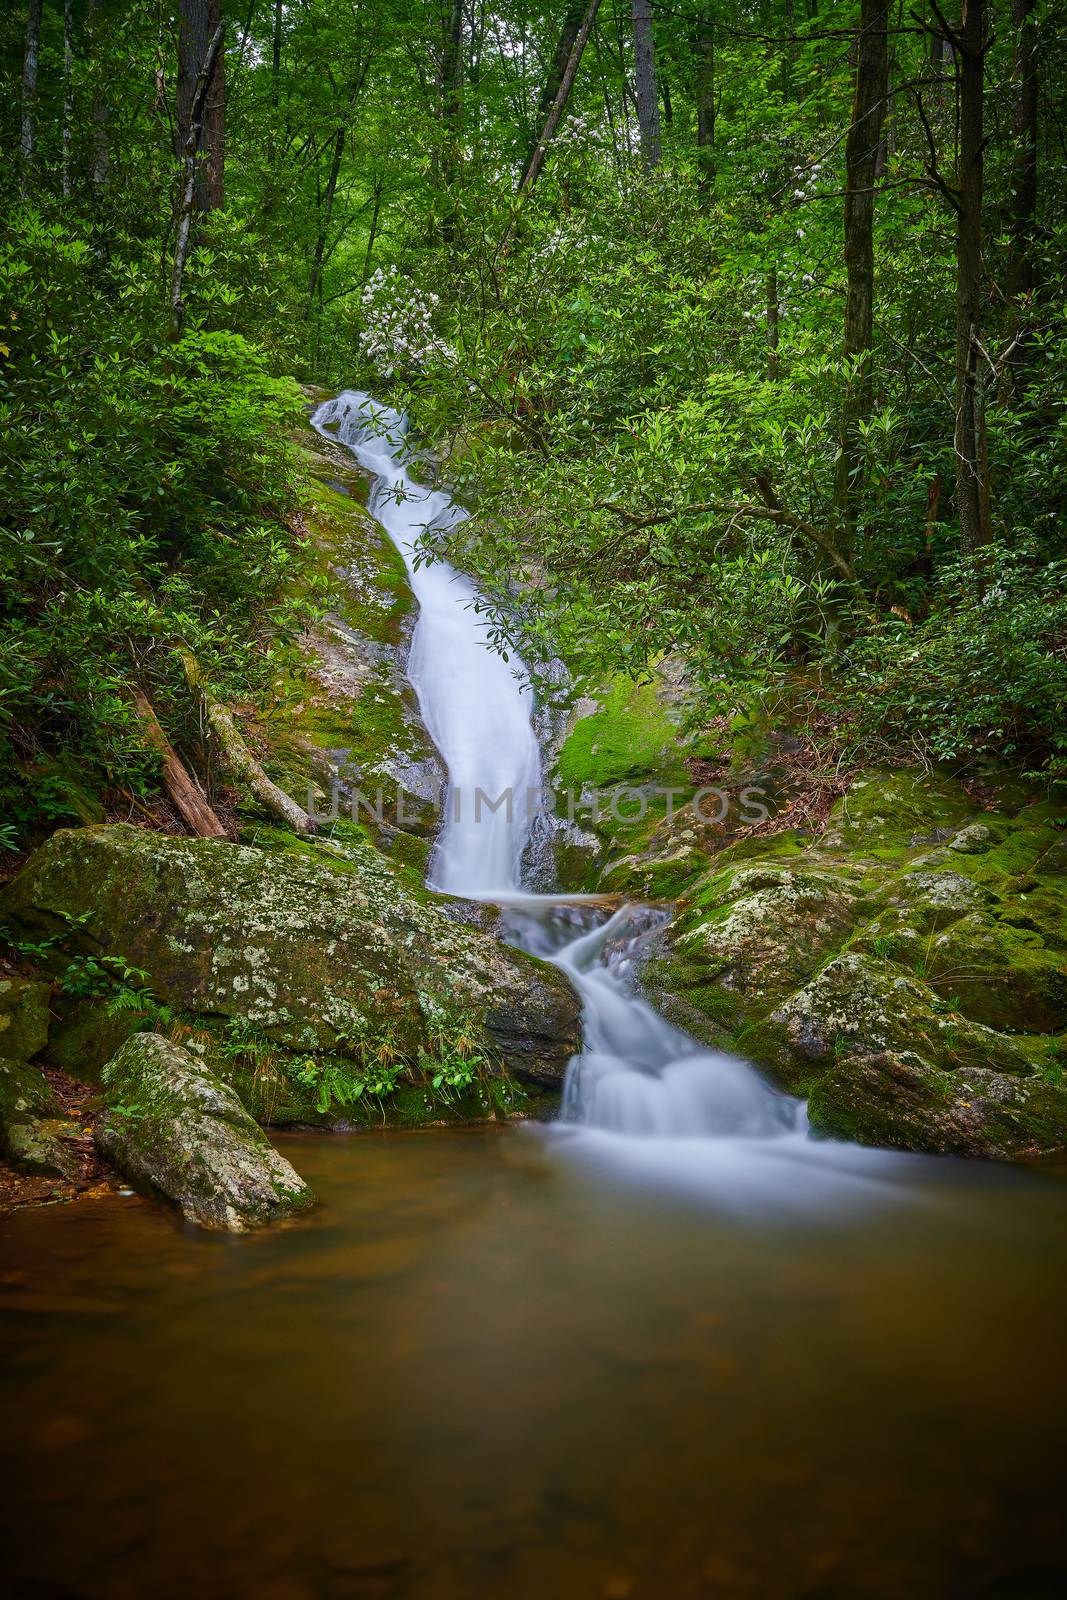 Ribbon waterfall in Pisgah National Forest, NC.